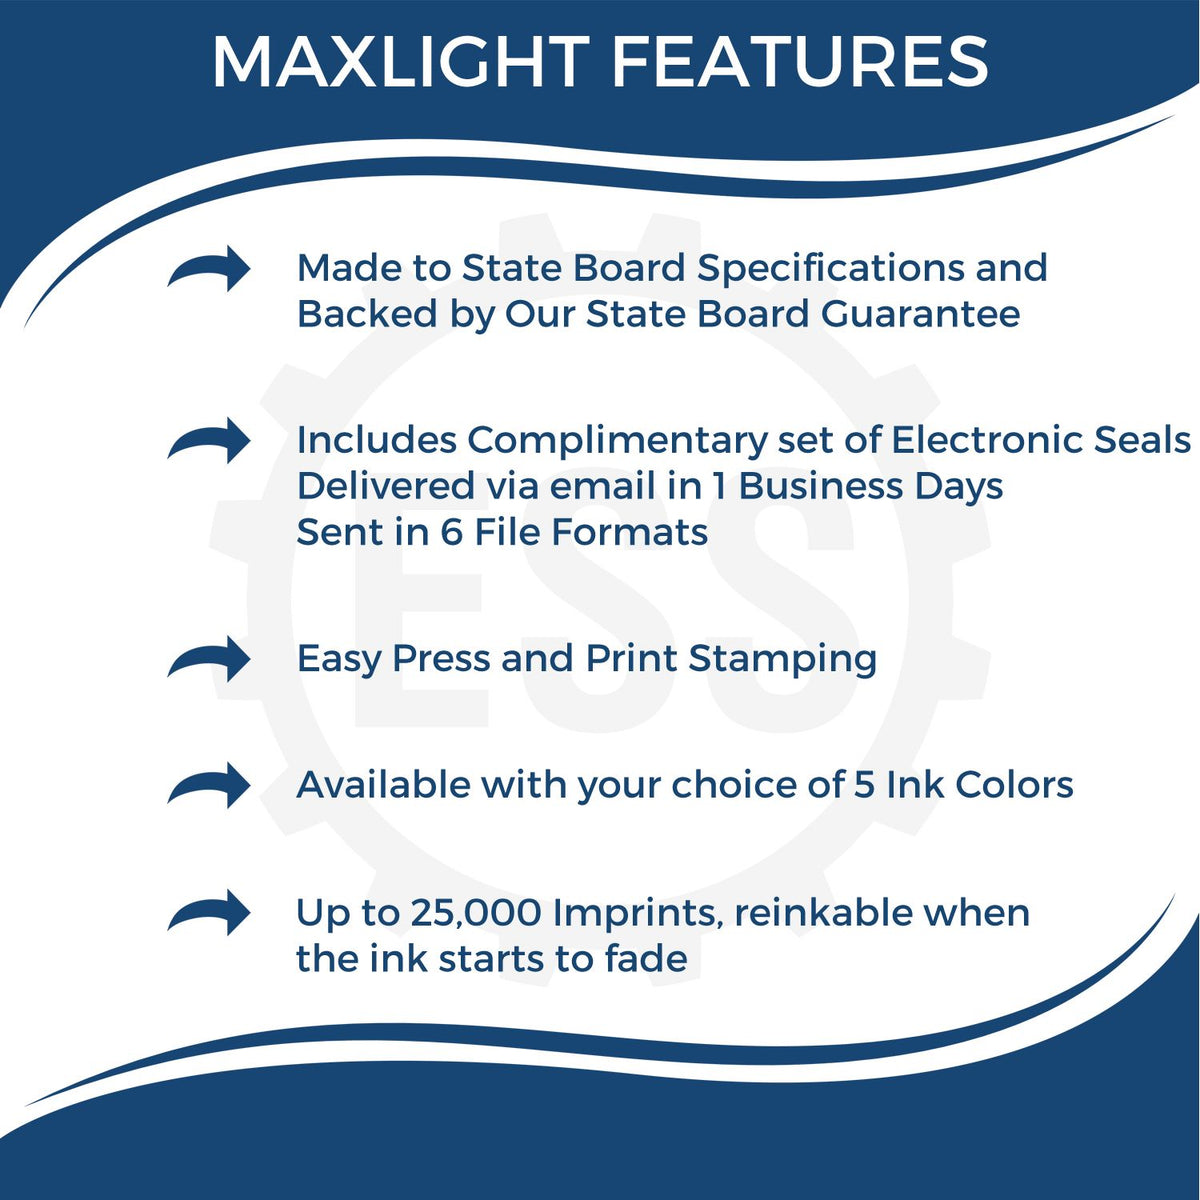 A picture of an infographic highlighting the selling points for the Premium MaxLight Pre-Inked Oregon Geology Stamp